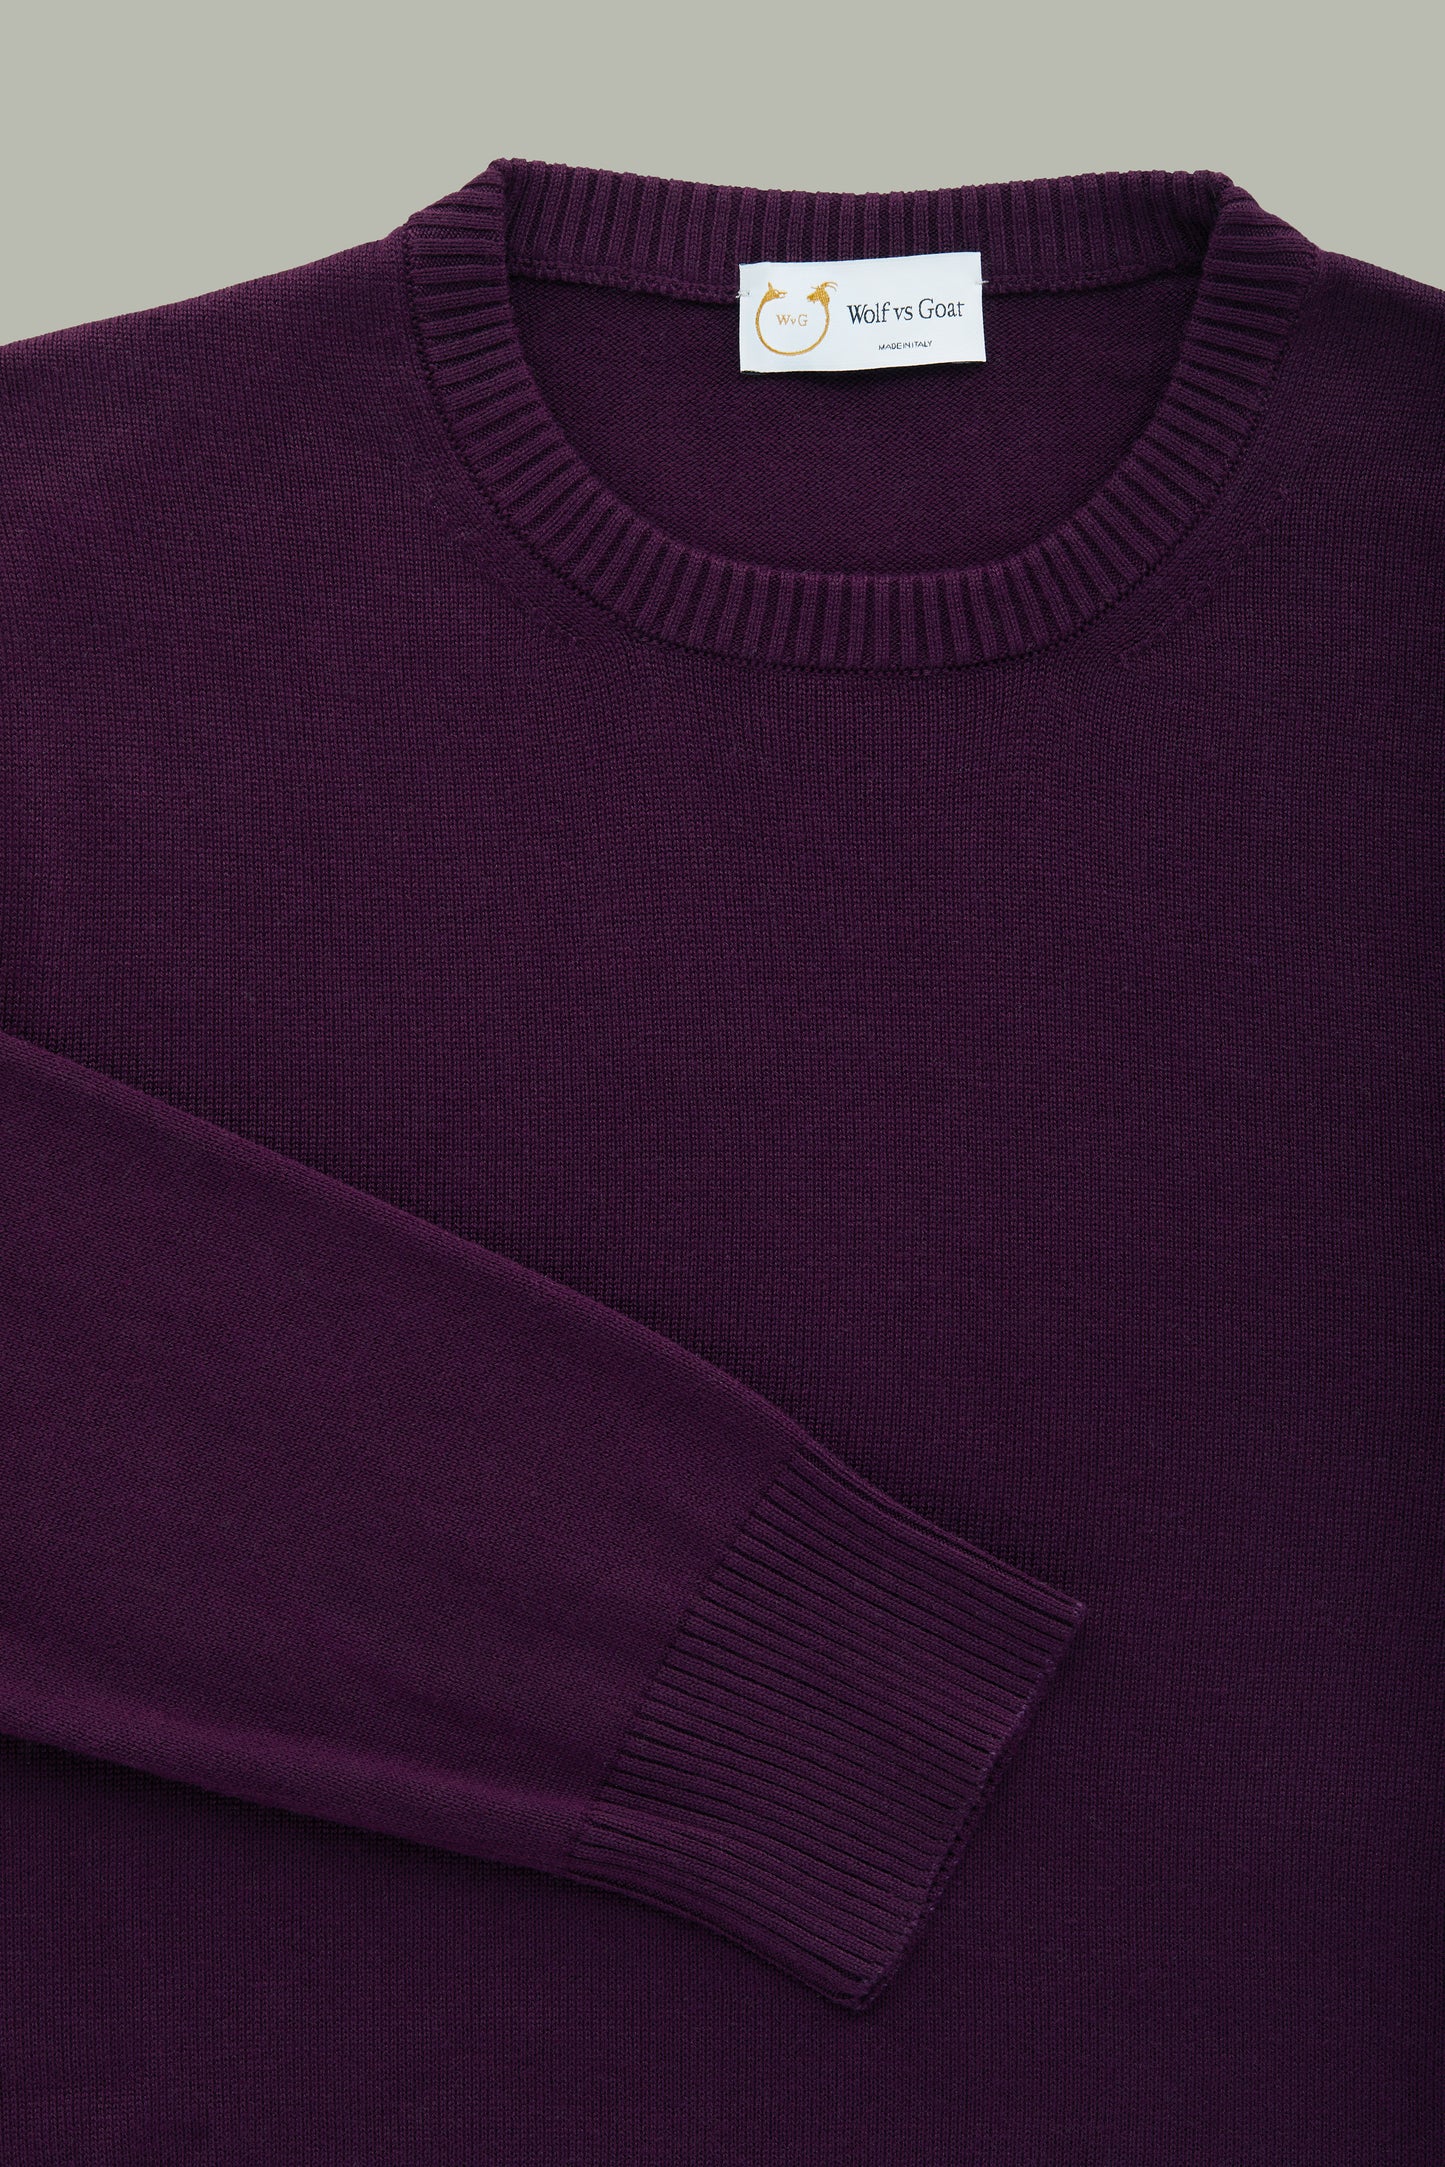 Long Sleeve Crew Neck Bamboo Cotton Cashmere Blend Knitted Sweater Purple